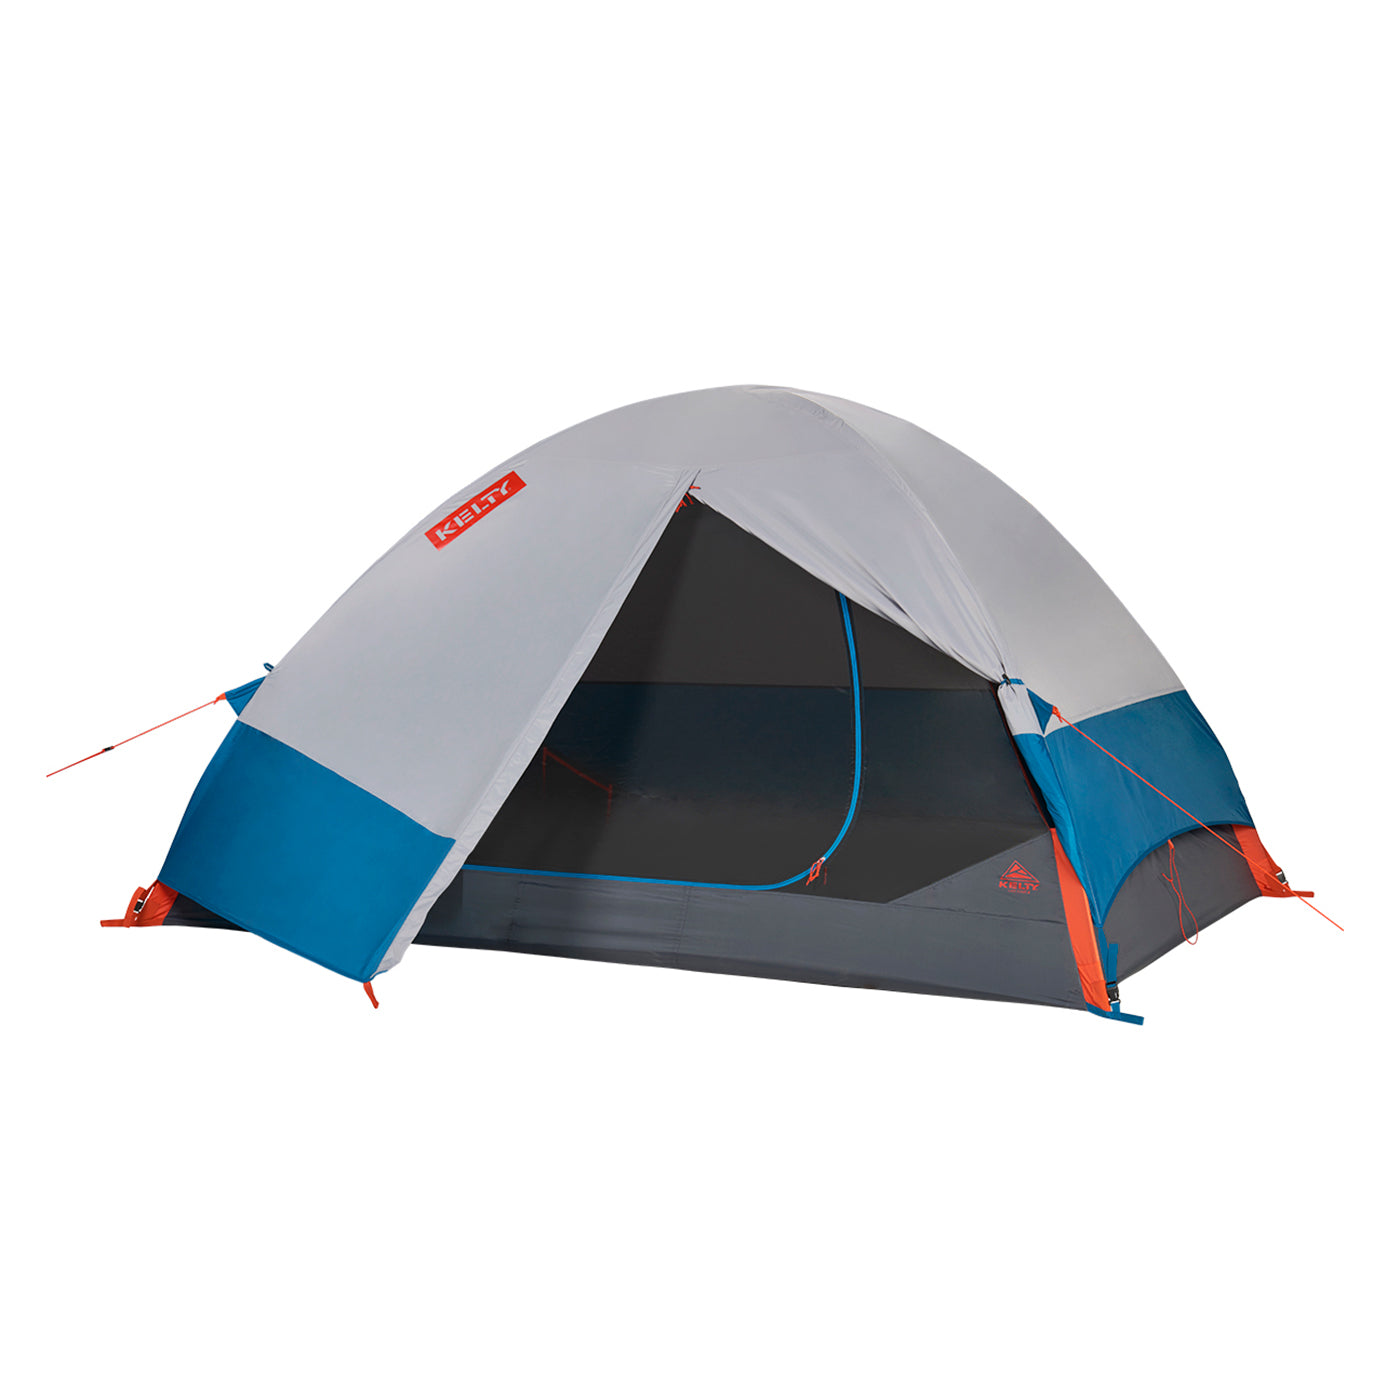 kelty late start 4 person tent with fly on and open door in color light and dark grey with blue and orange accents